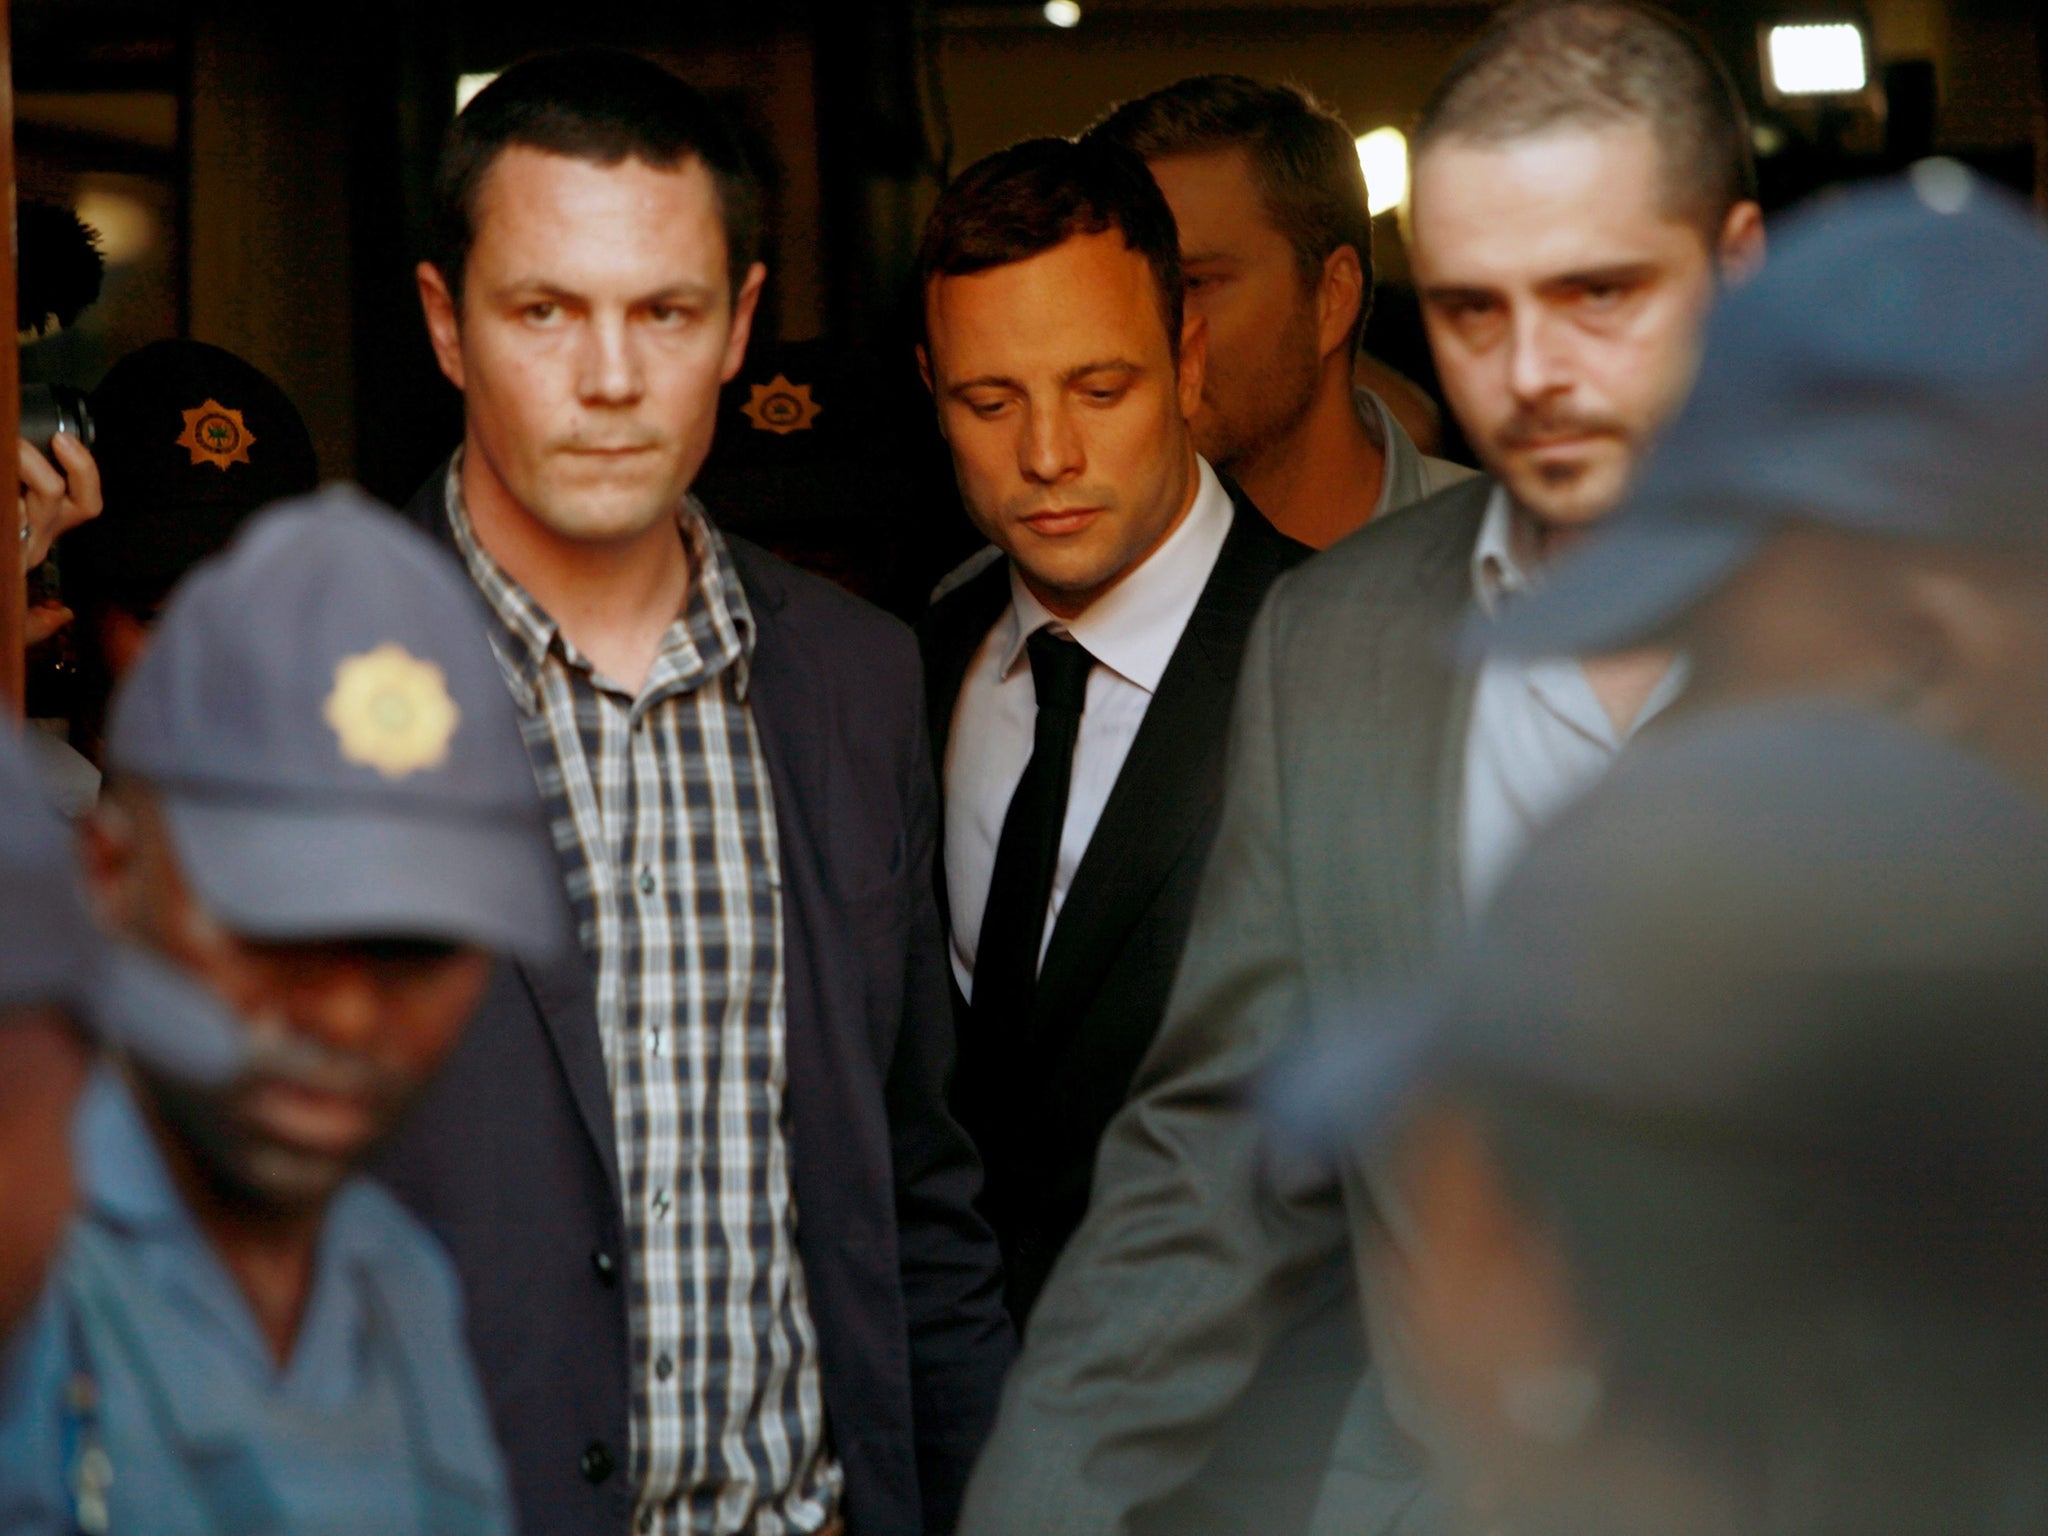 South Africa paralymic athlete Oscar Pistorius leaves court after the first day of the judge's verdict summary